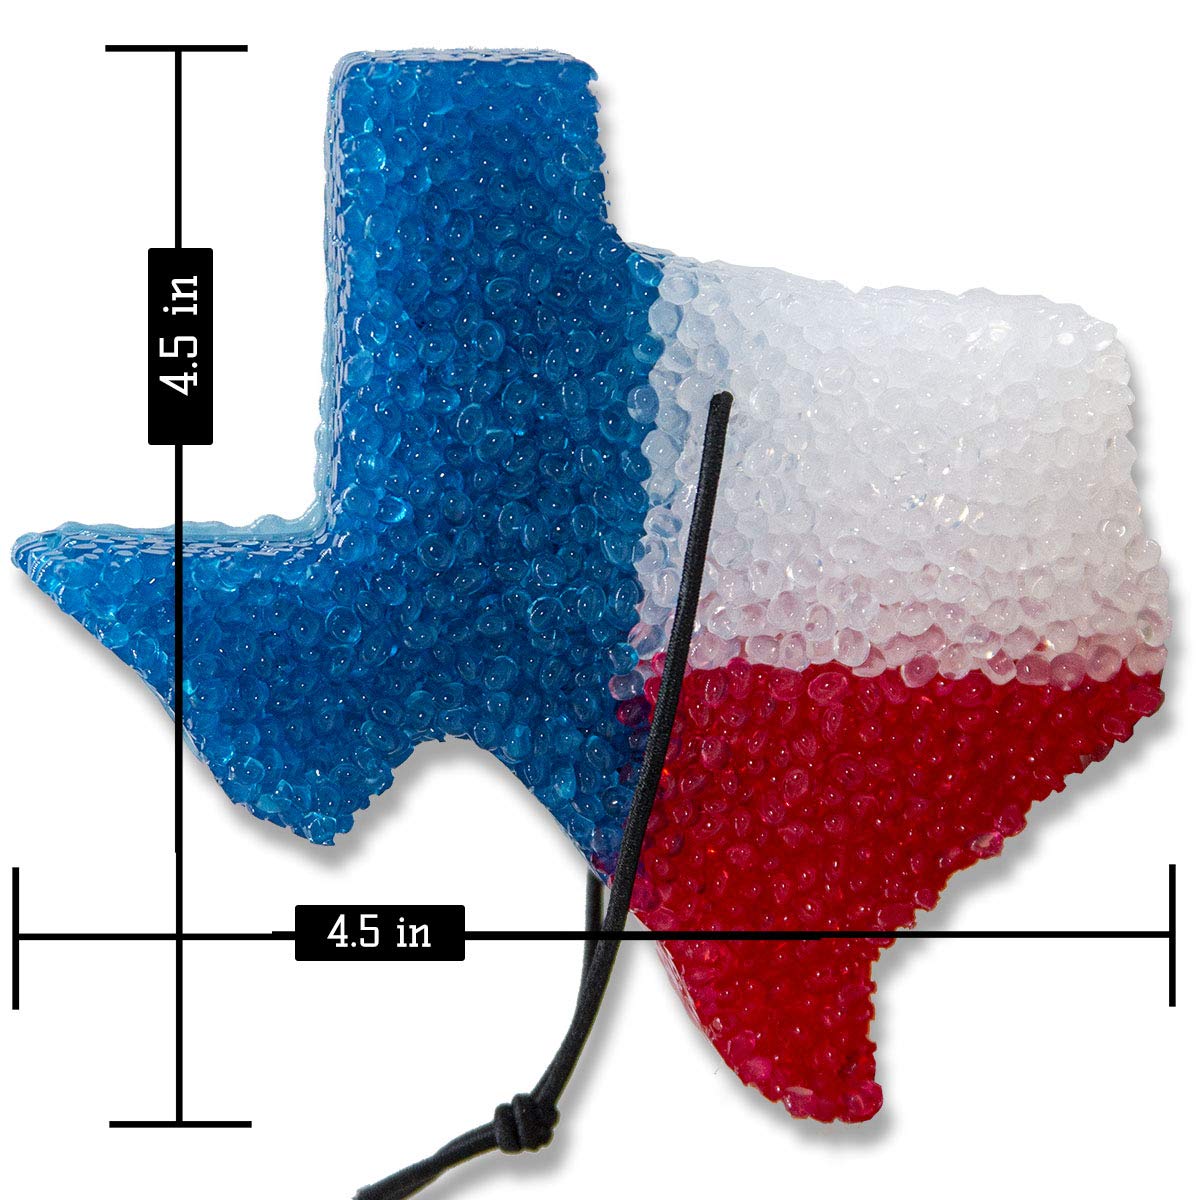 Leather and Lace, Lone Star Candles and More’s Original Aroma of Genuine Leather and Creamy Vanilla, Car & Air Freshener, USA Made in Texas, 3-Color Texas State 1-Pack